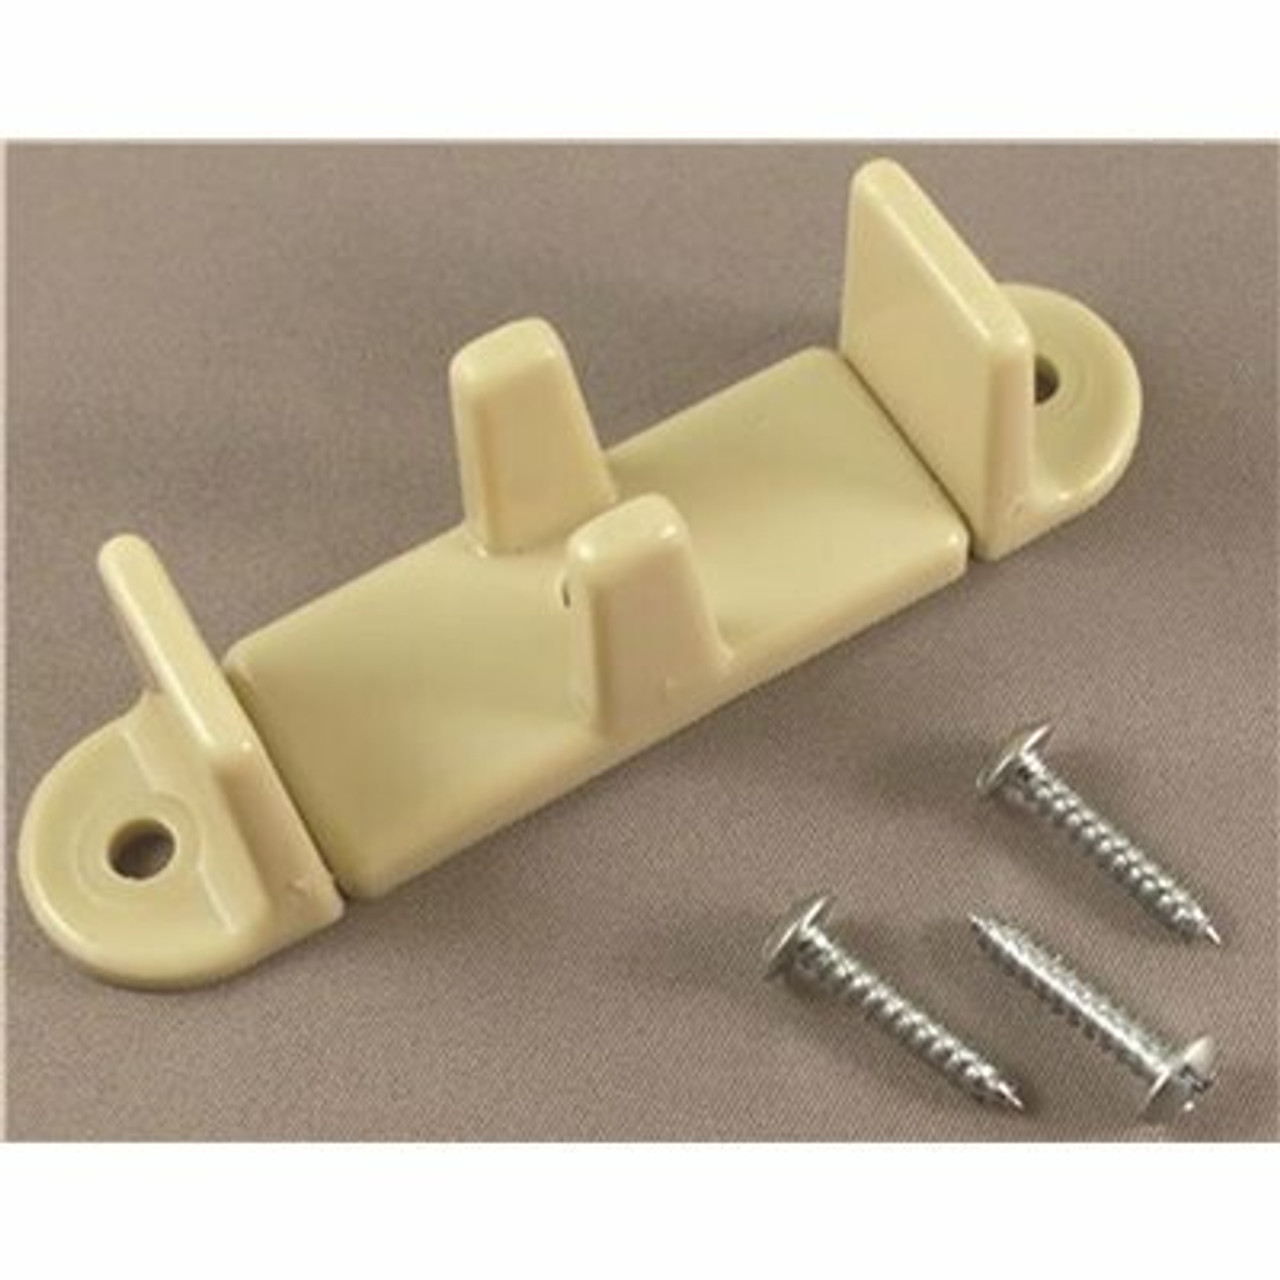 Strybuc Industries Adjustable Bypass Floor Guide (2-Pack)